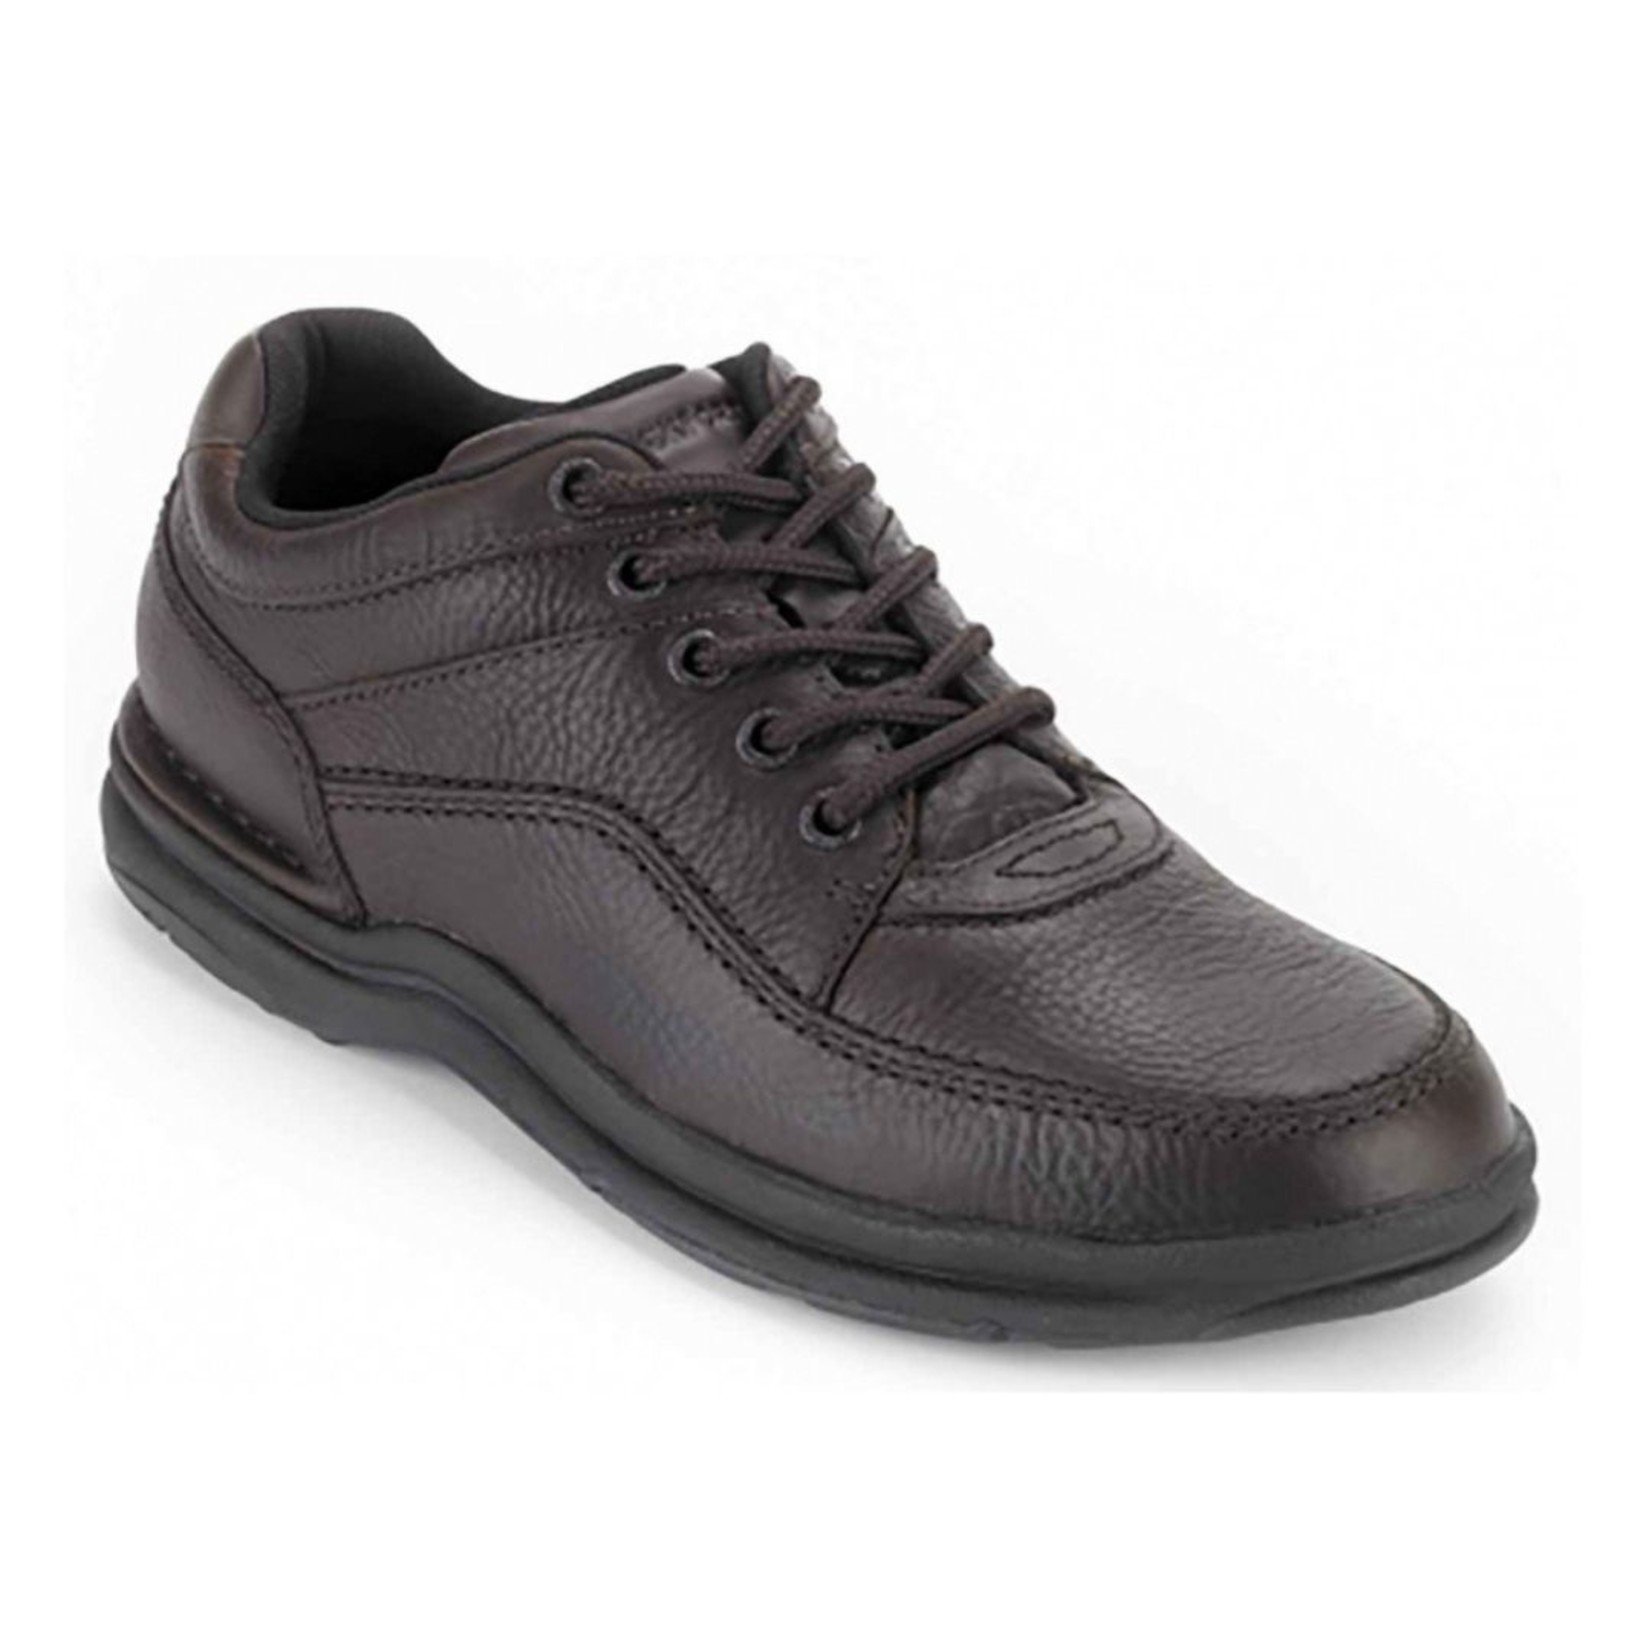 Rockport Rockport WT Smooth Classic Men's Shoes